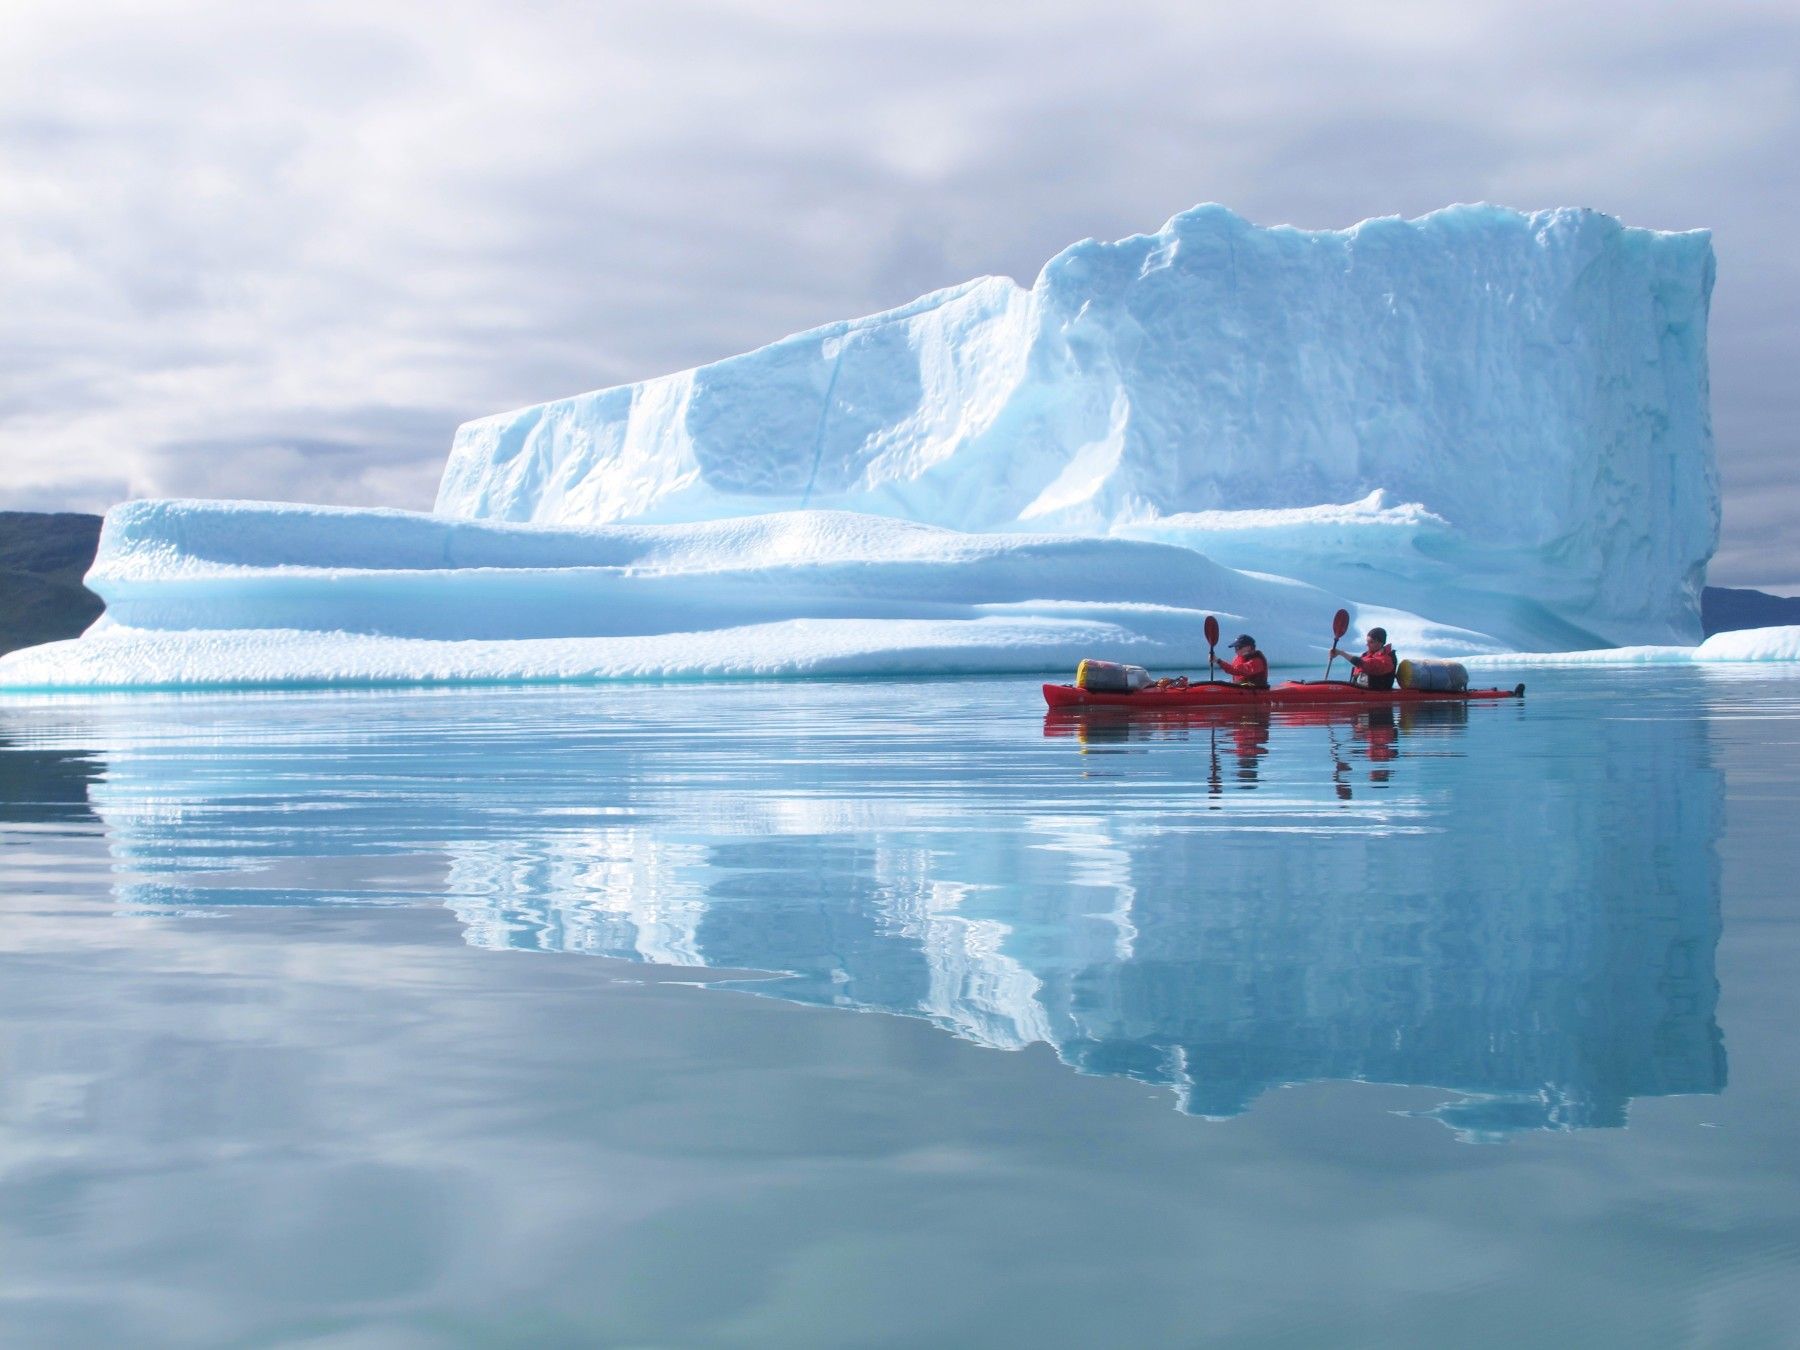 Kayakers pass an iceberg in a Greenland fjord